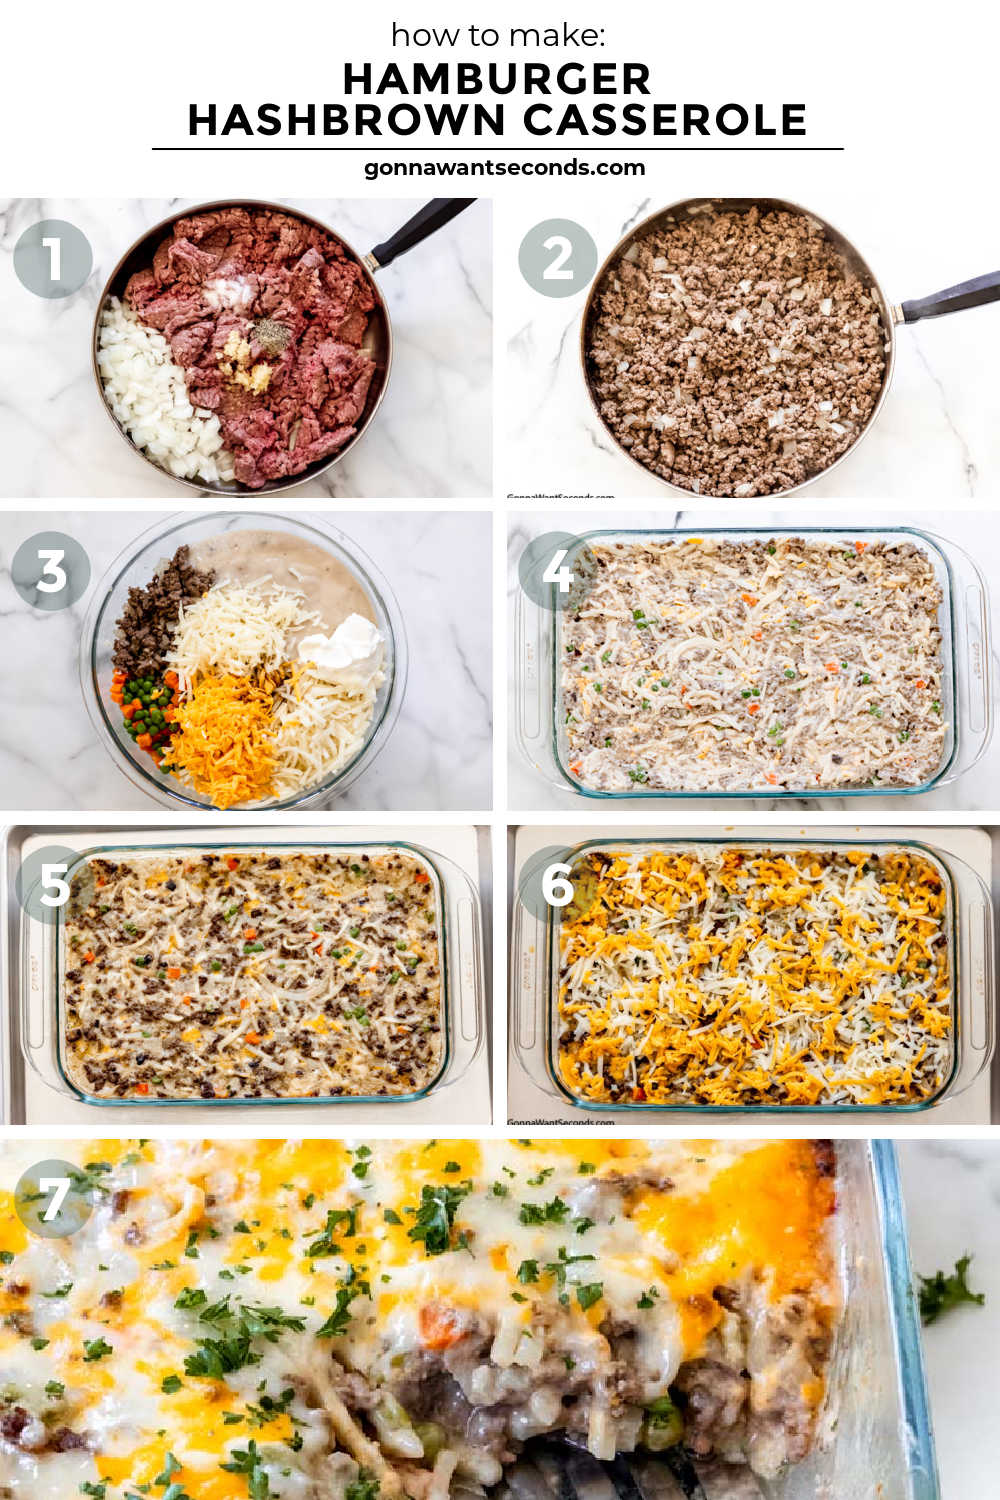 Step by step how to make Hamburger Hashbrown Casserole